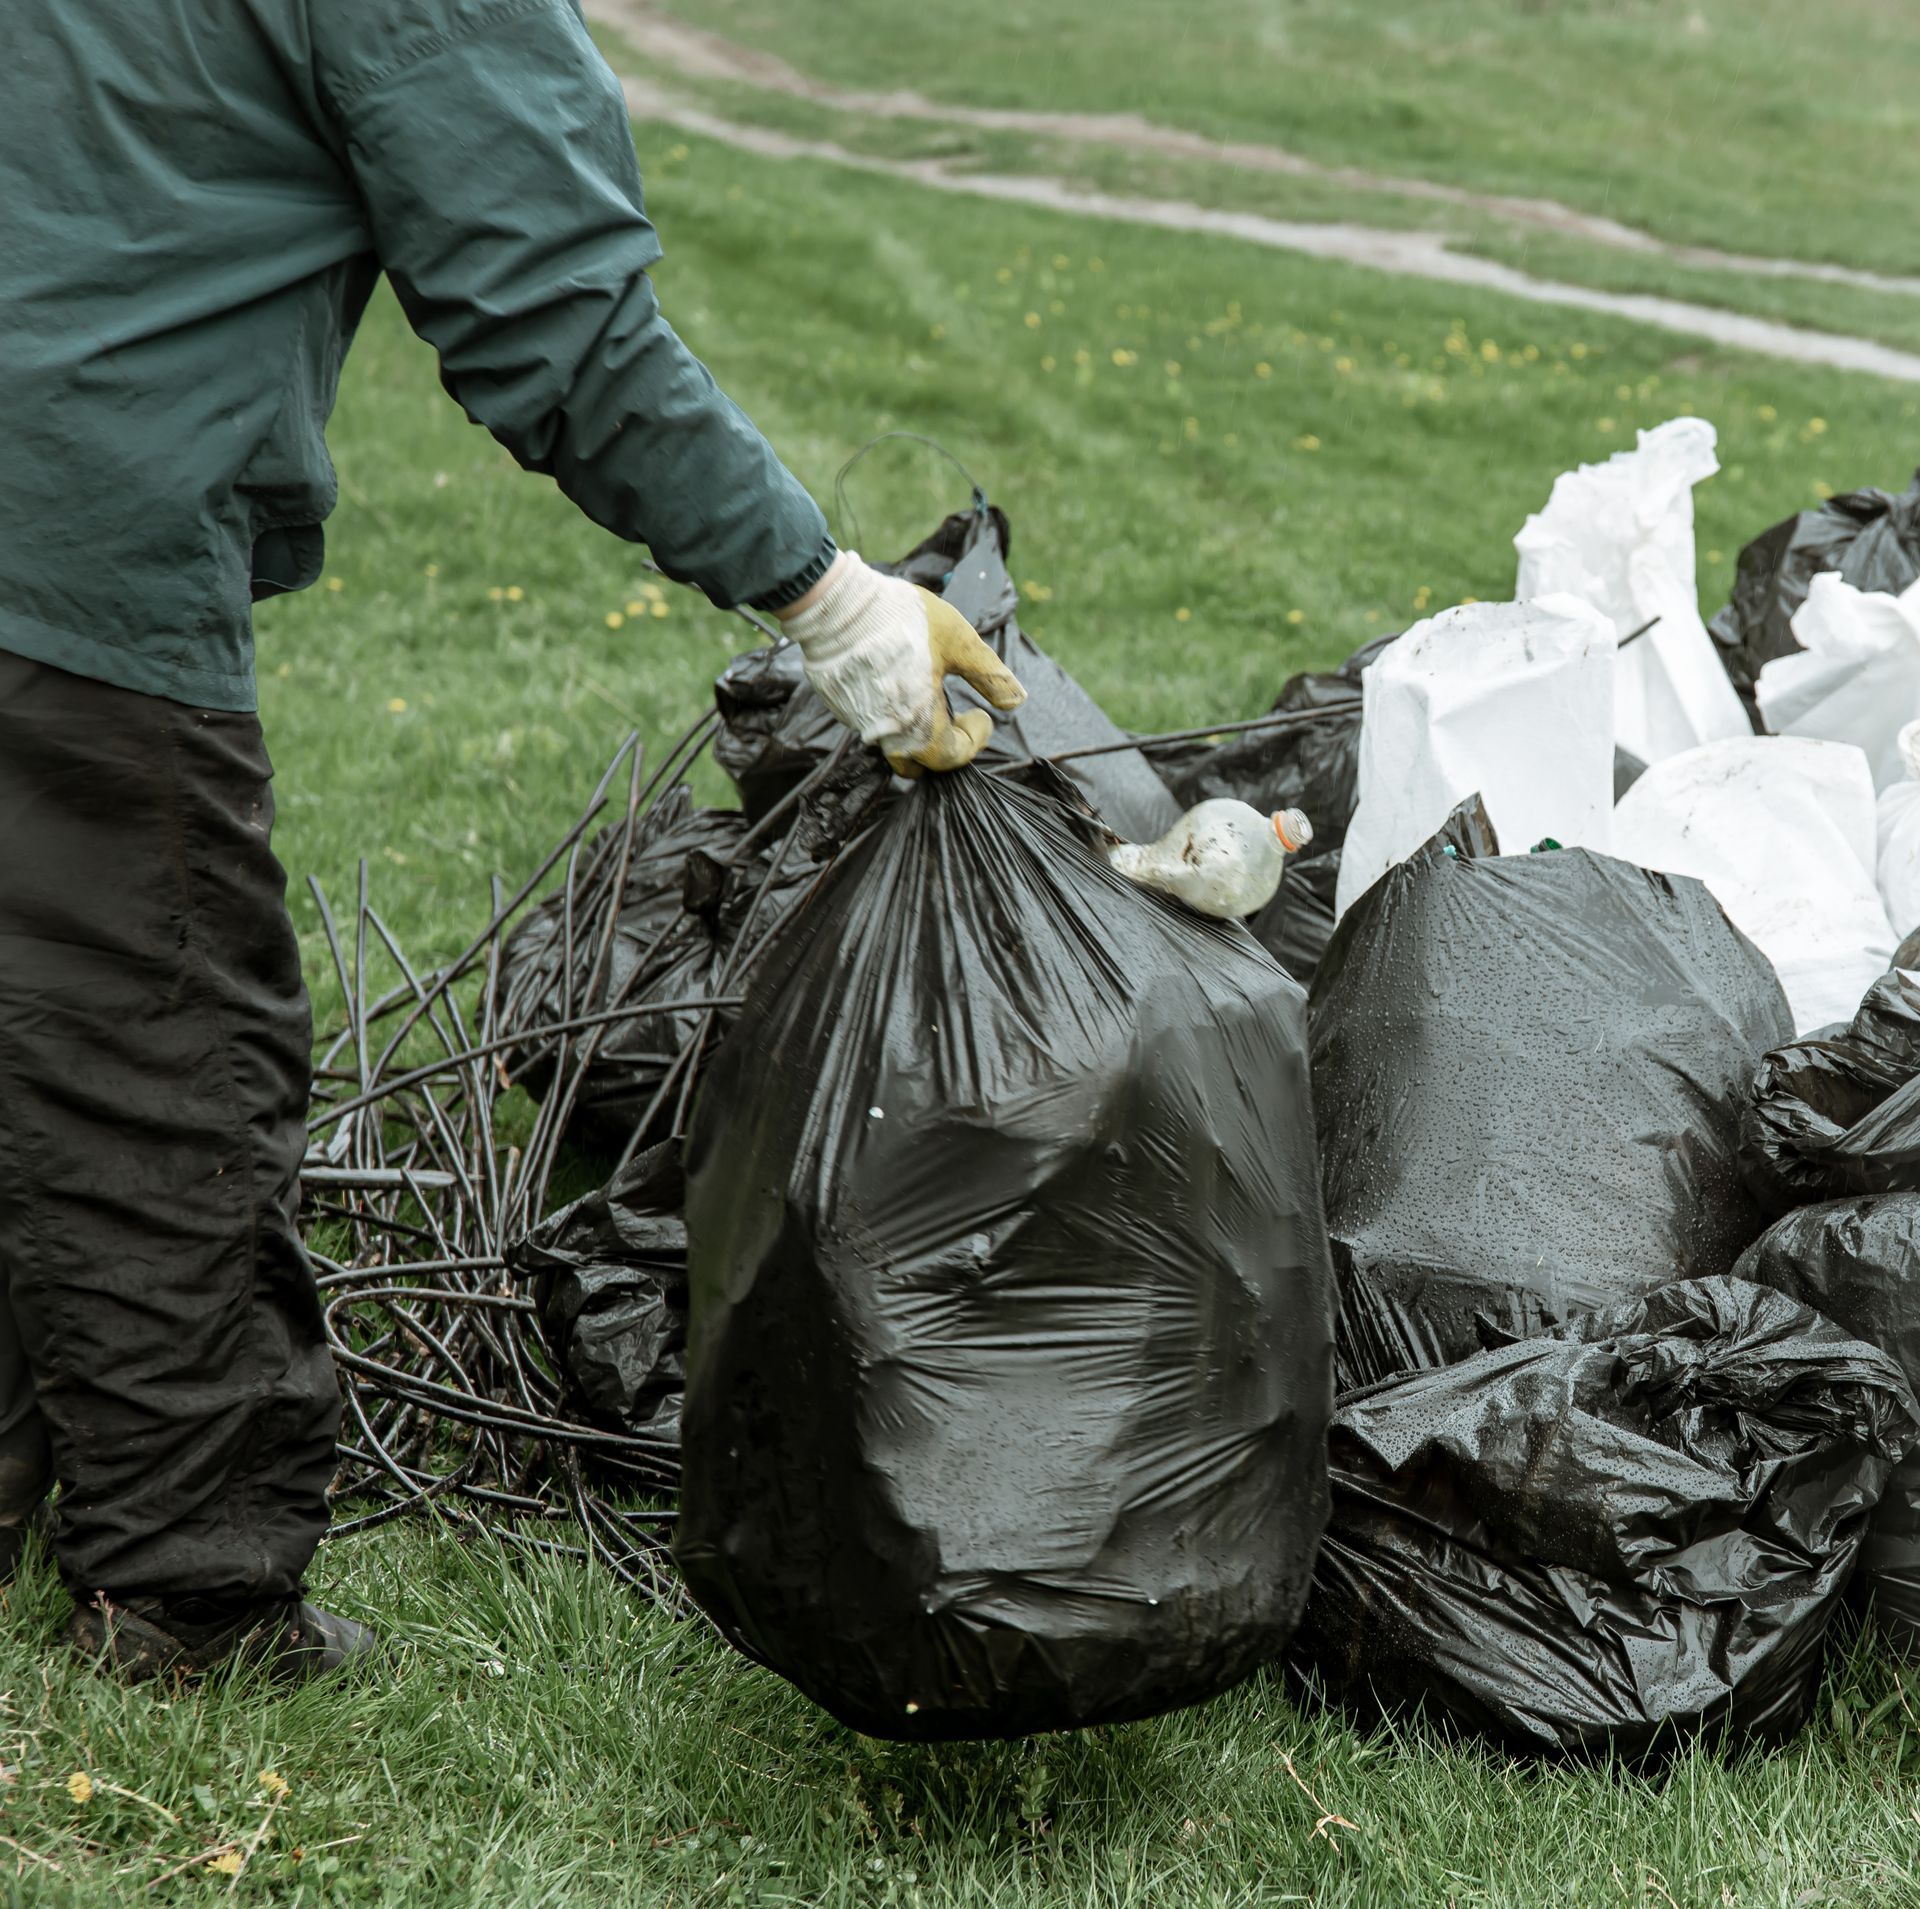 a man in a green jacket is holding a black garbage bag